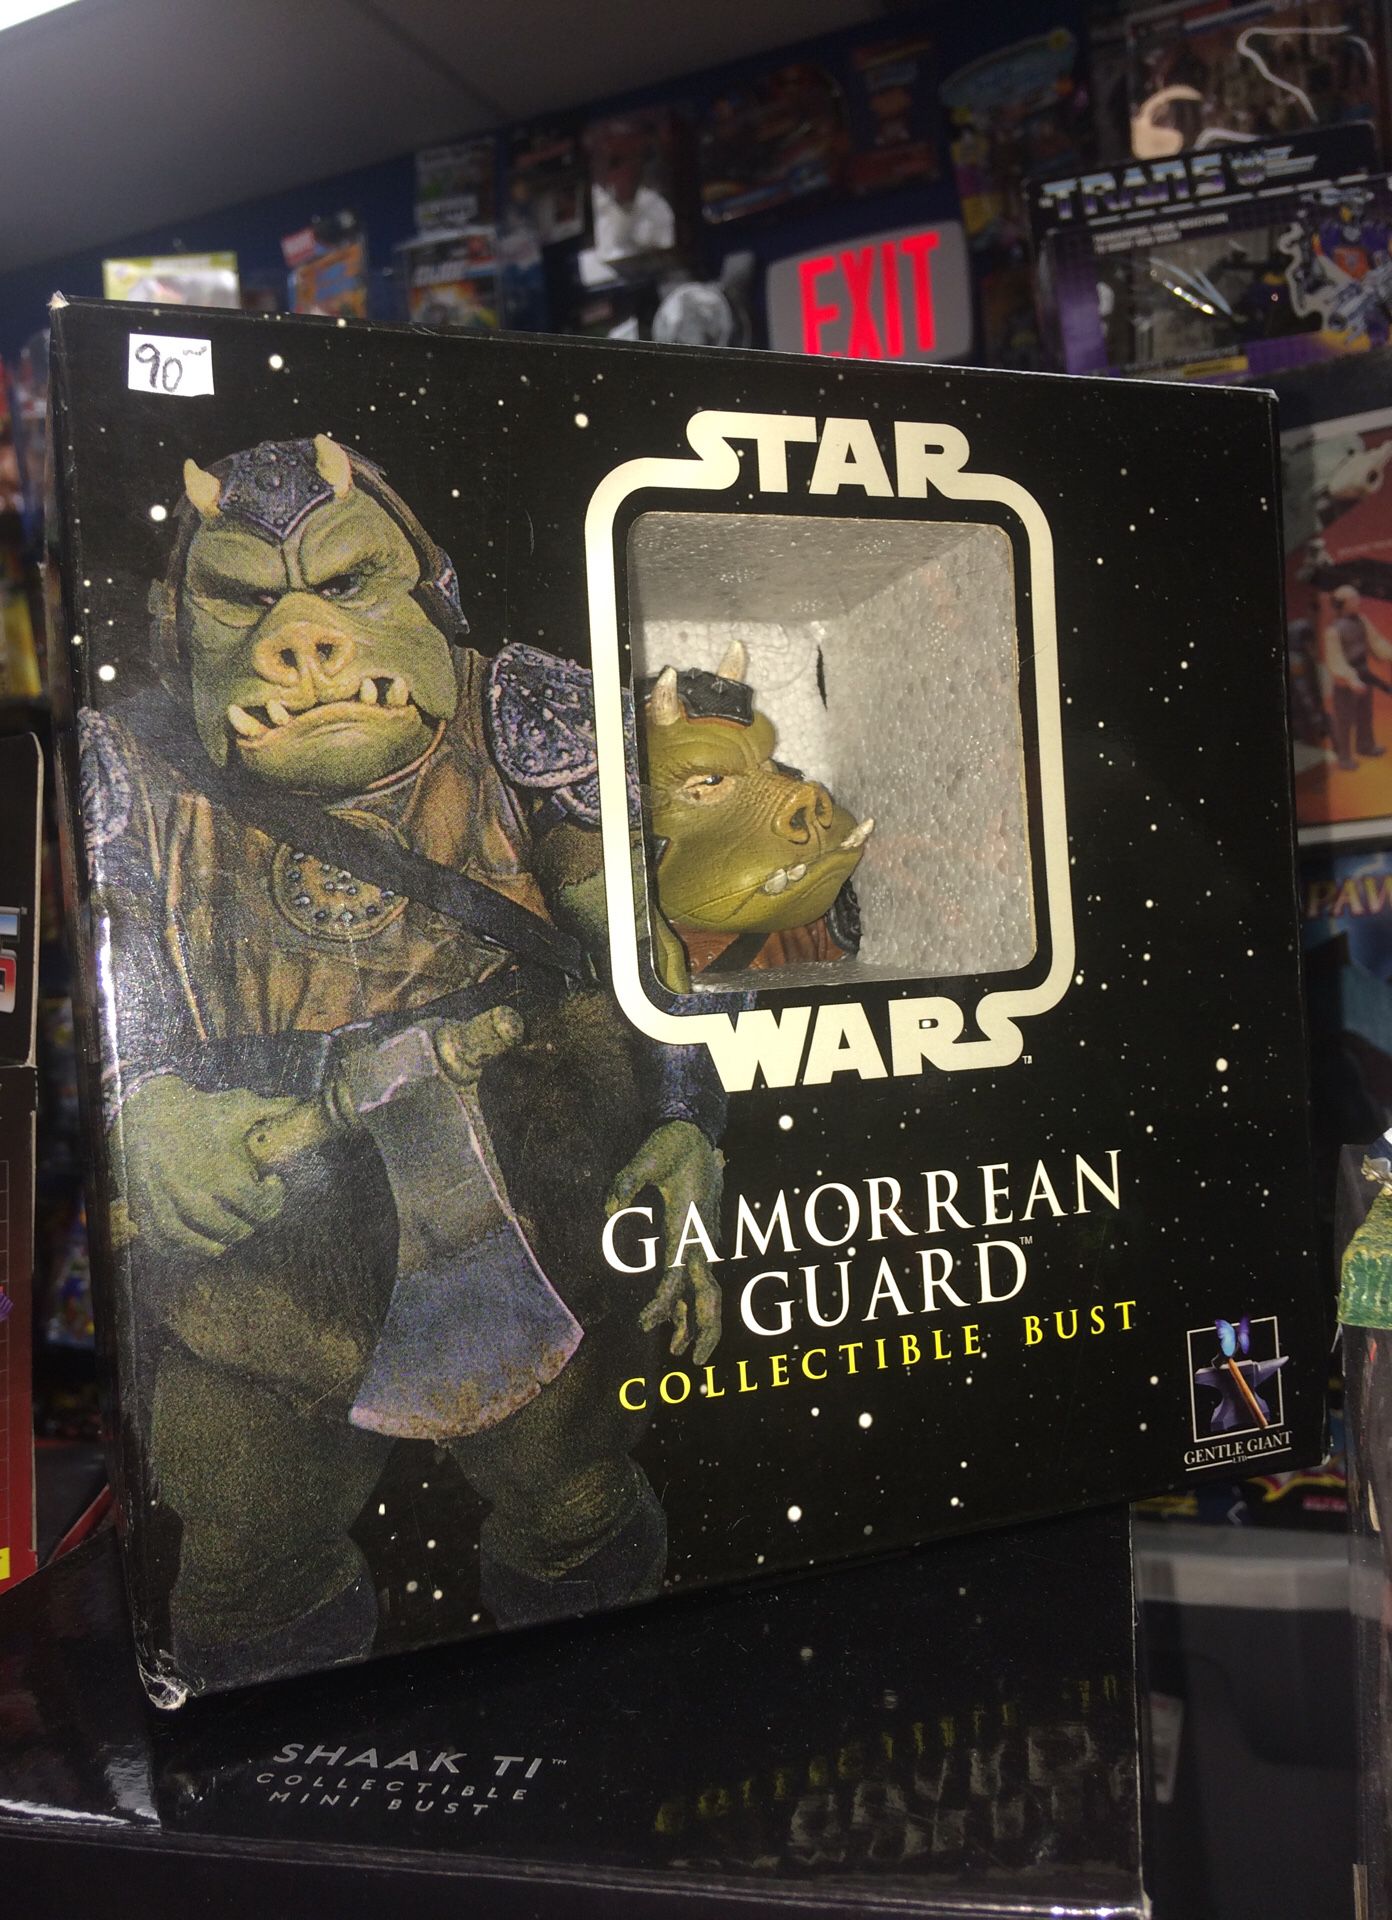 Star Wars Gamorrean Guard bust New in package by gentle giant $75